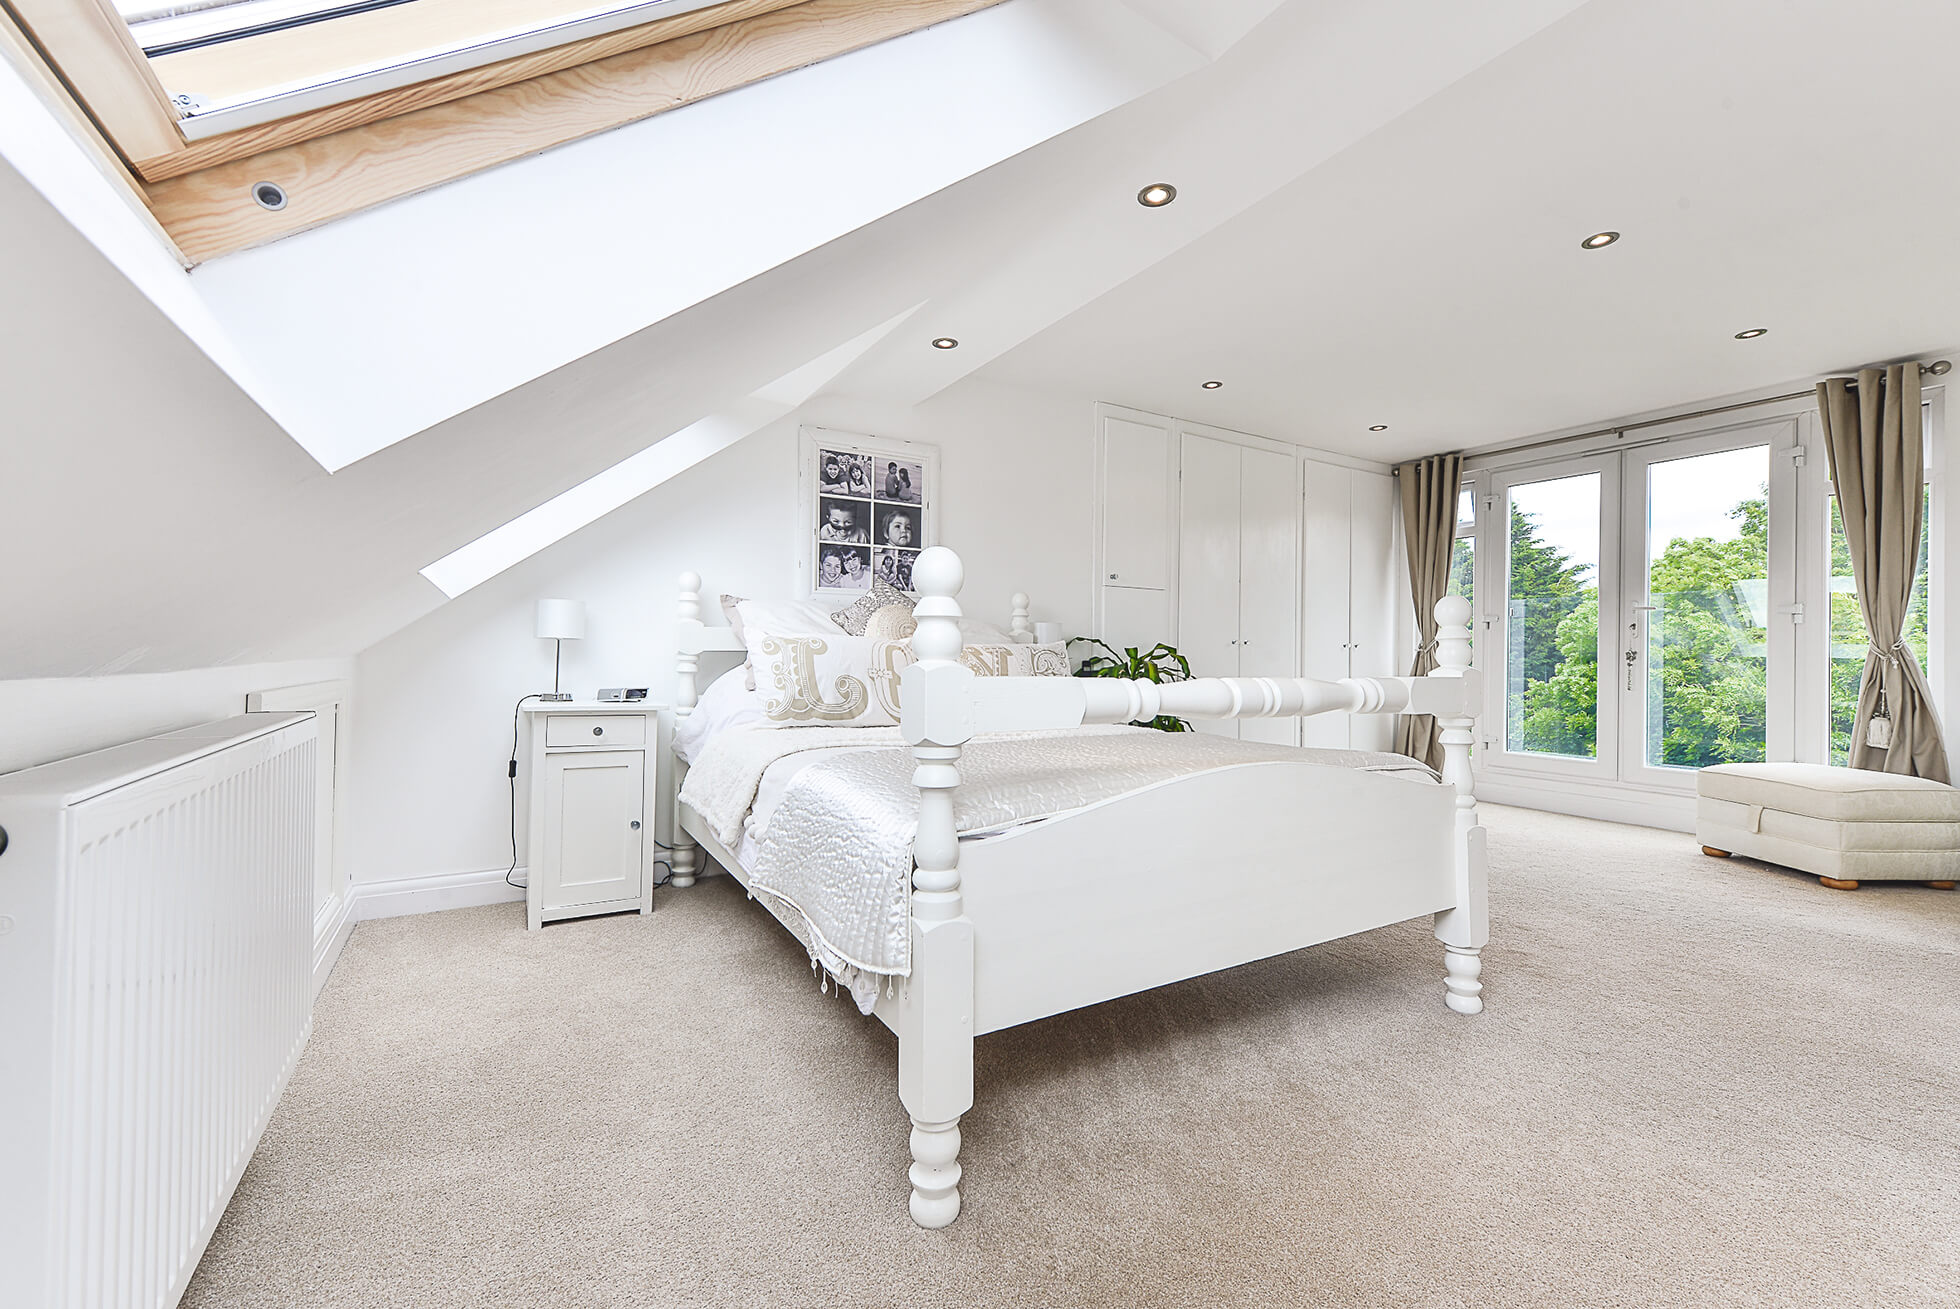 Do you have a question about converting your Loft in Stapleford? Here are the most popular questions asked by our clients.